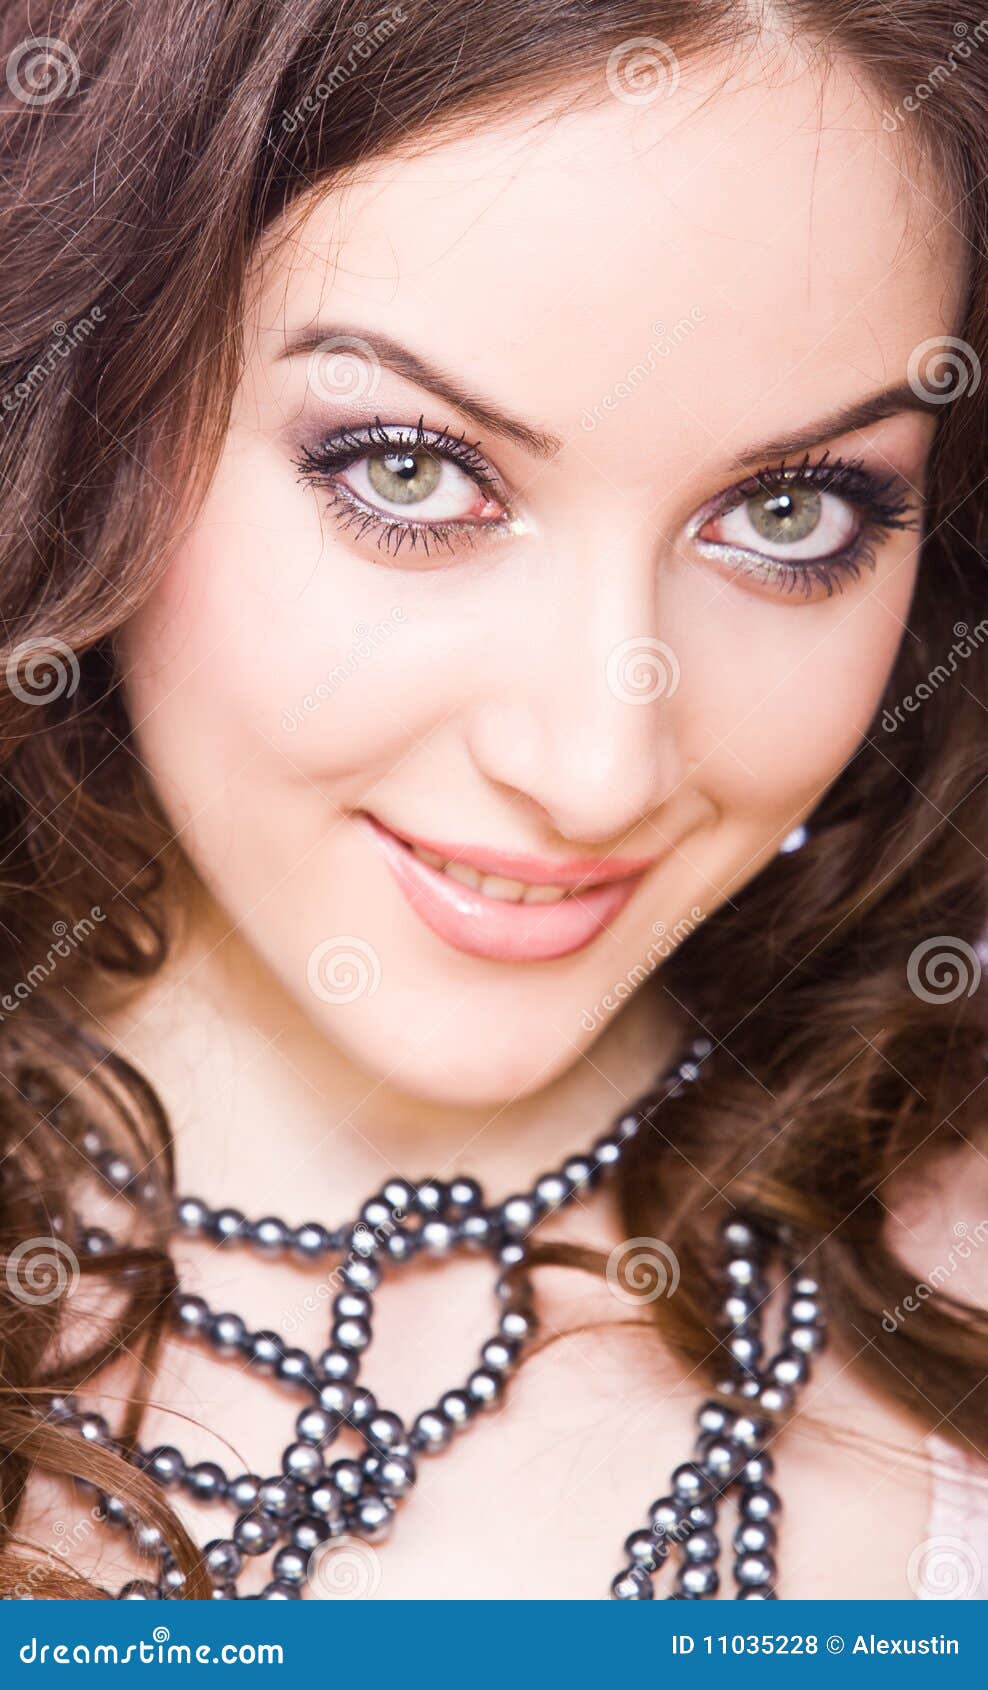 skittish smiling young woman with be